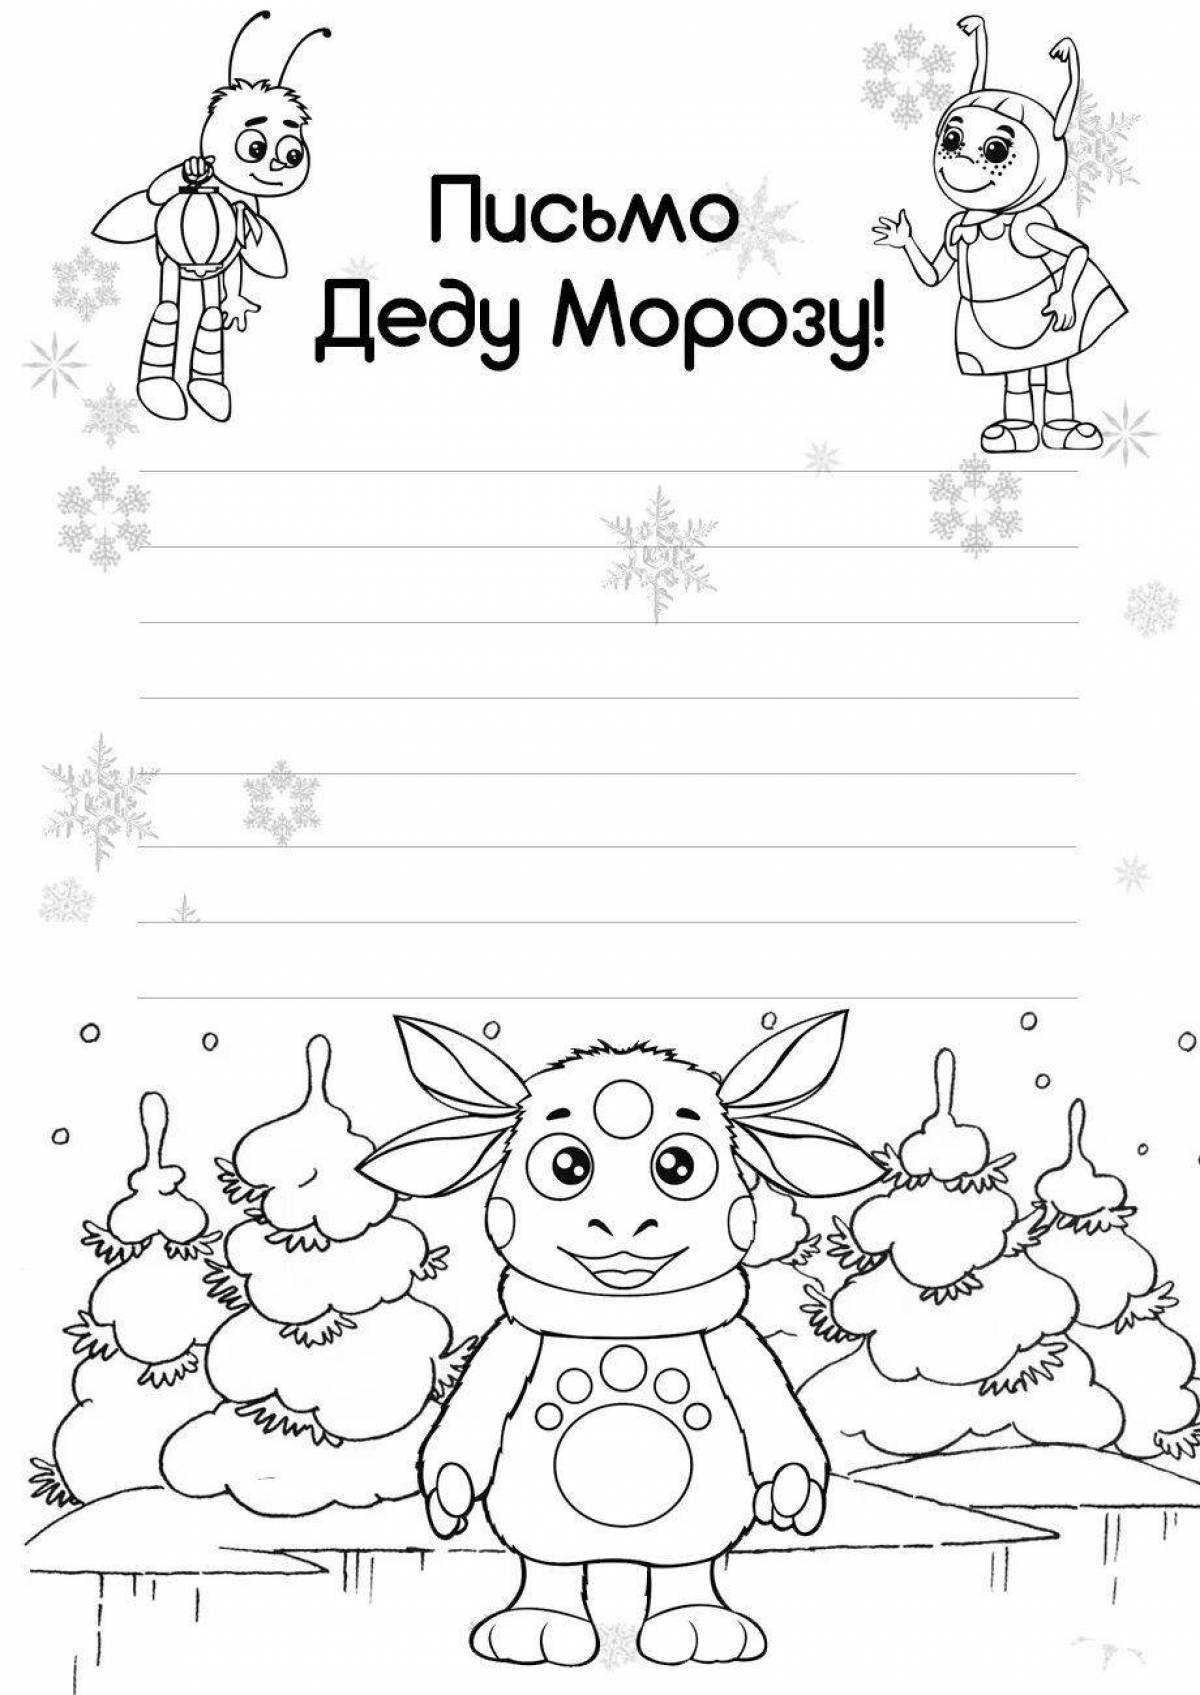 Fun letter coloring book for kids